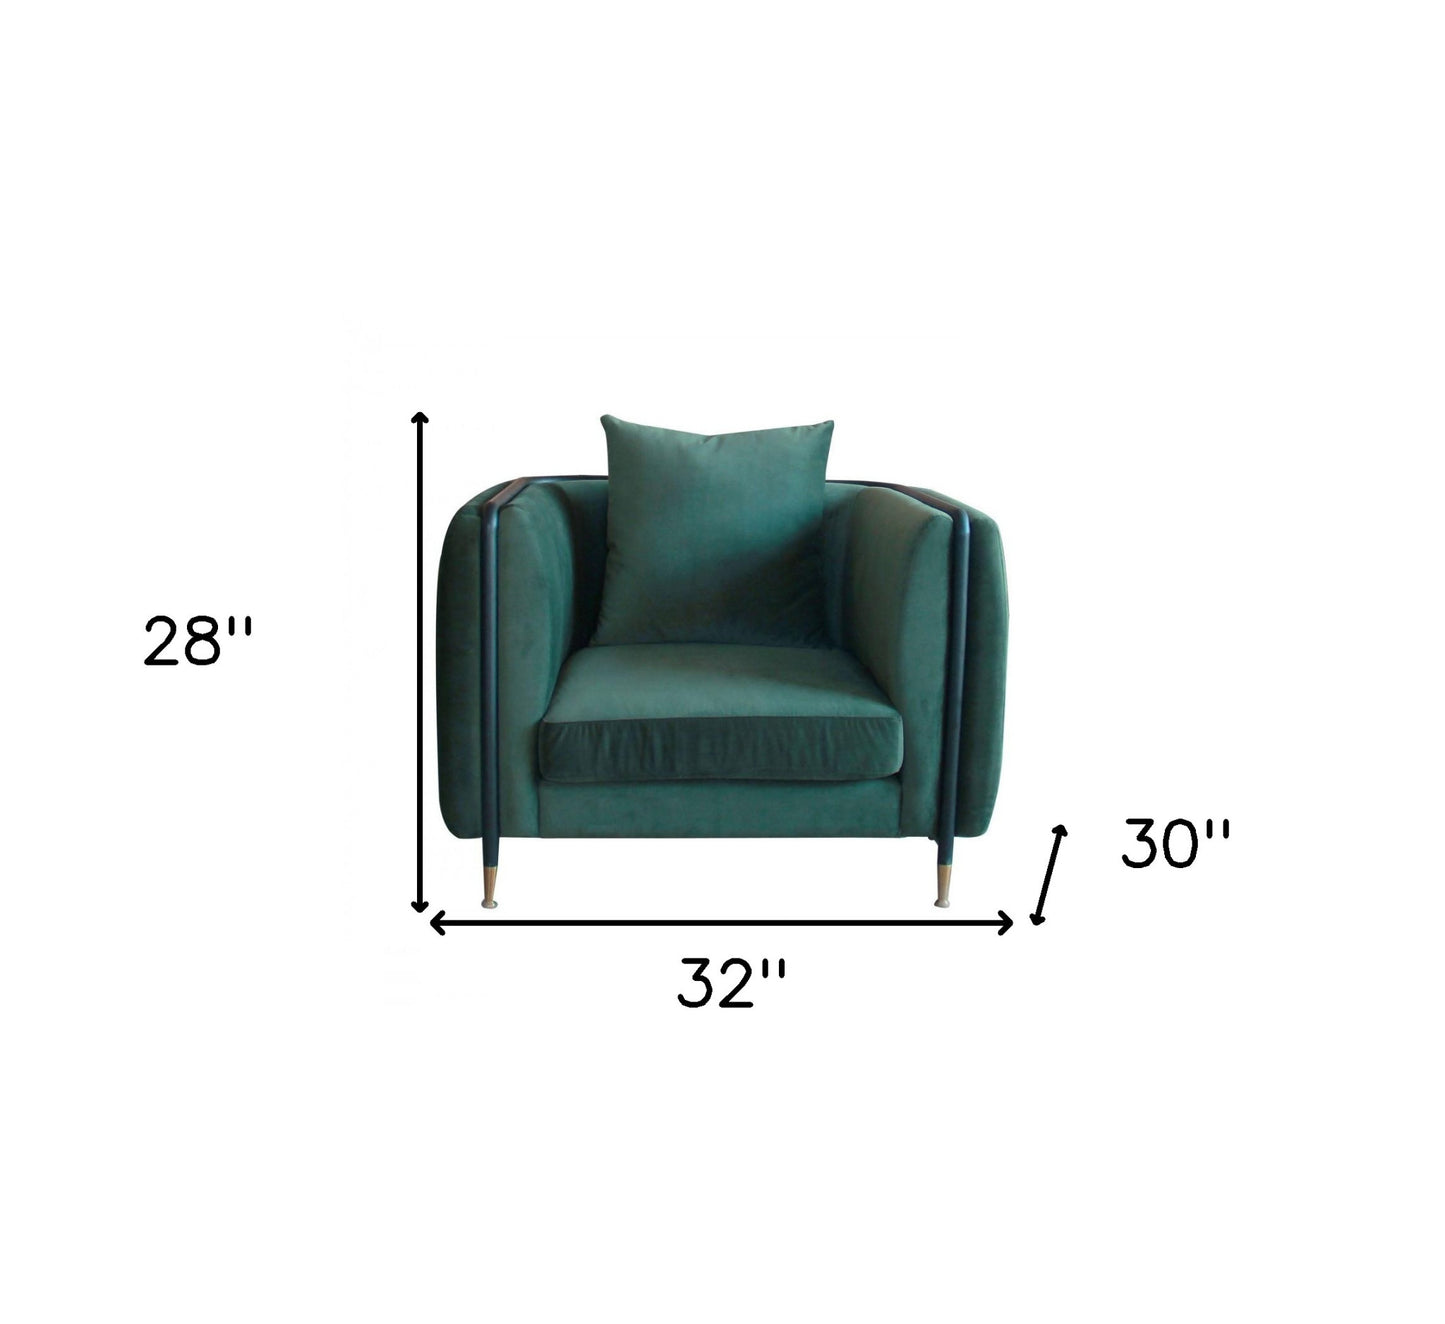 32" Green Velvet And Black Solid Color Arm Chair